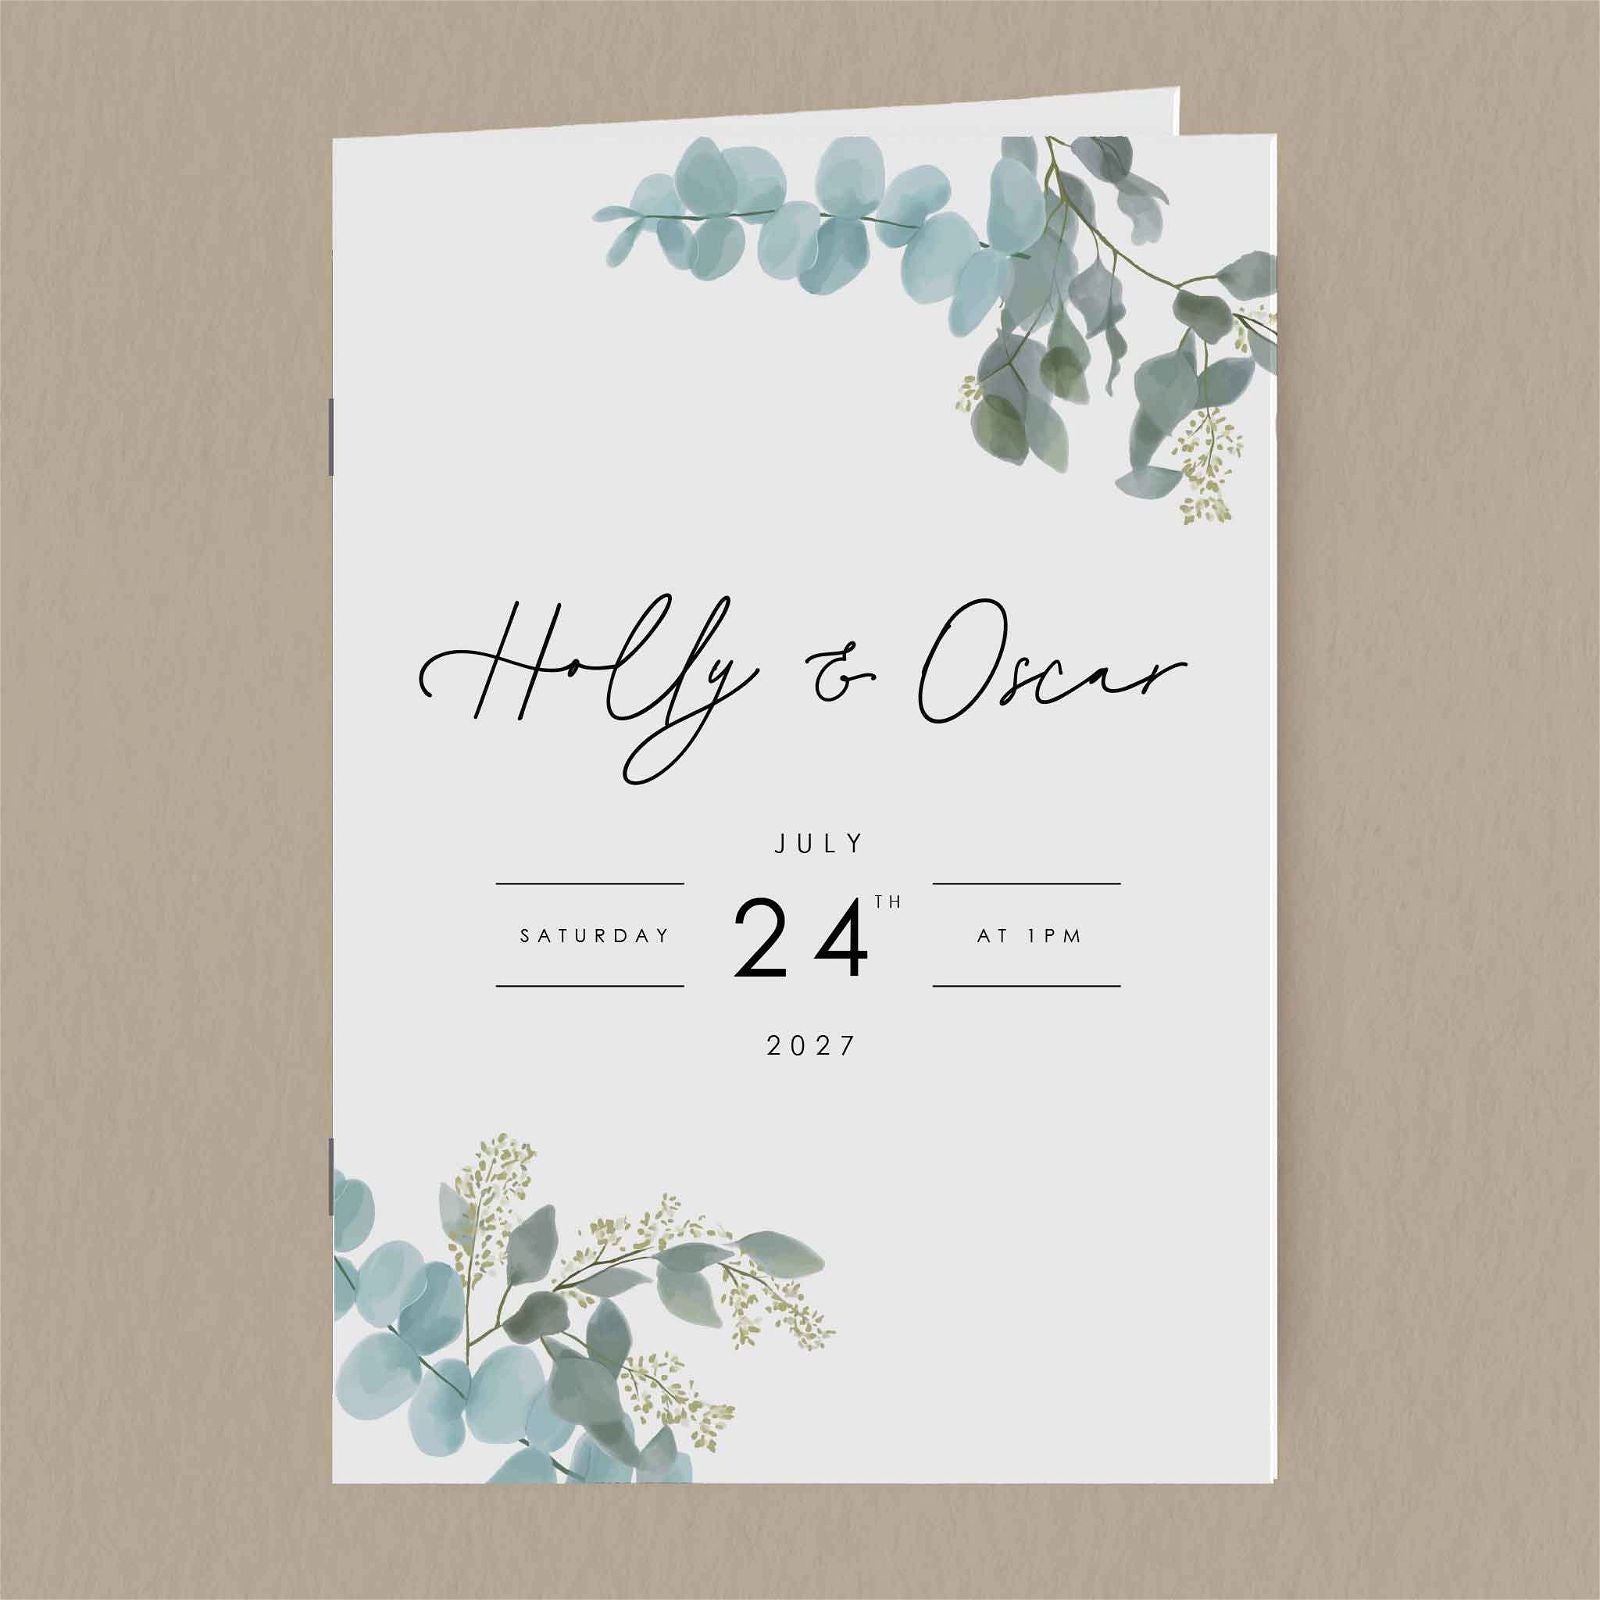 Holly Order Of Service  Ivy and Gold Wedding Stationery   